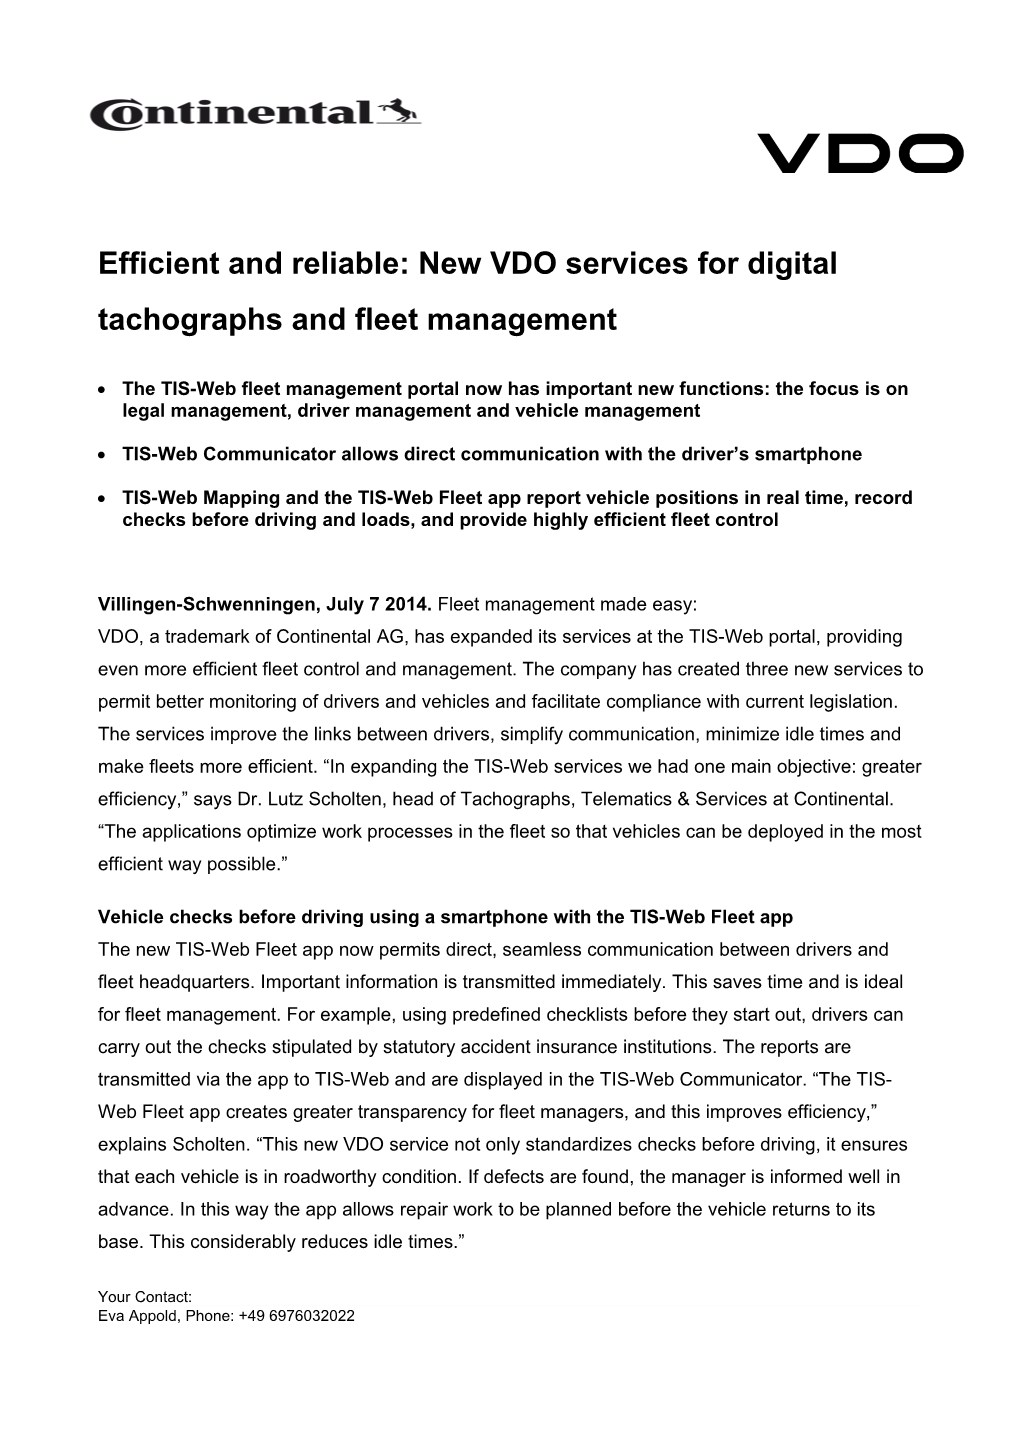 Efficient and Reliable: New VDO Services for Digital Tachographs and Fleet Management